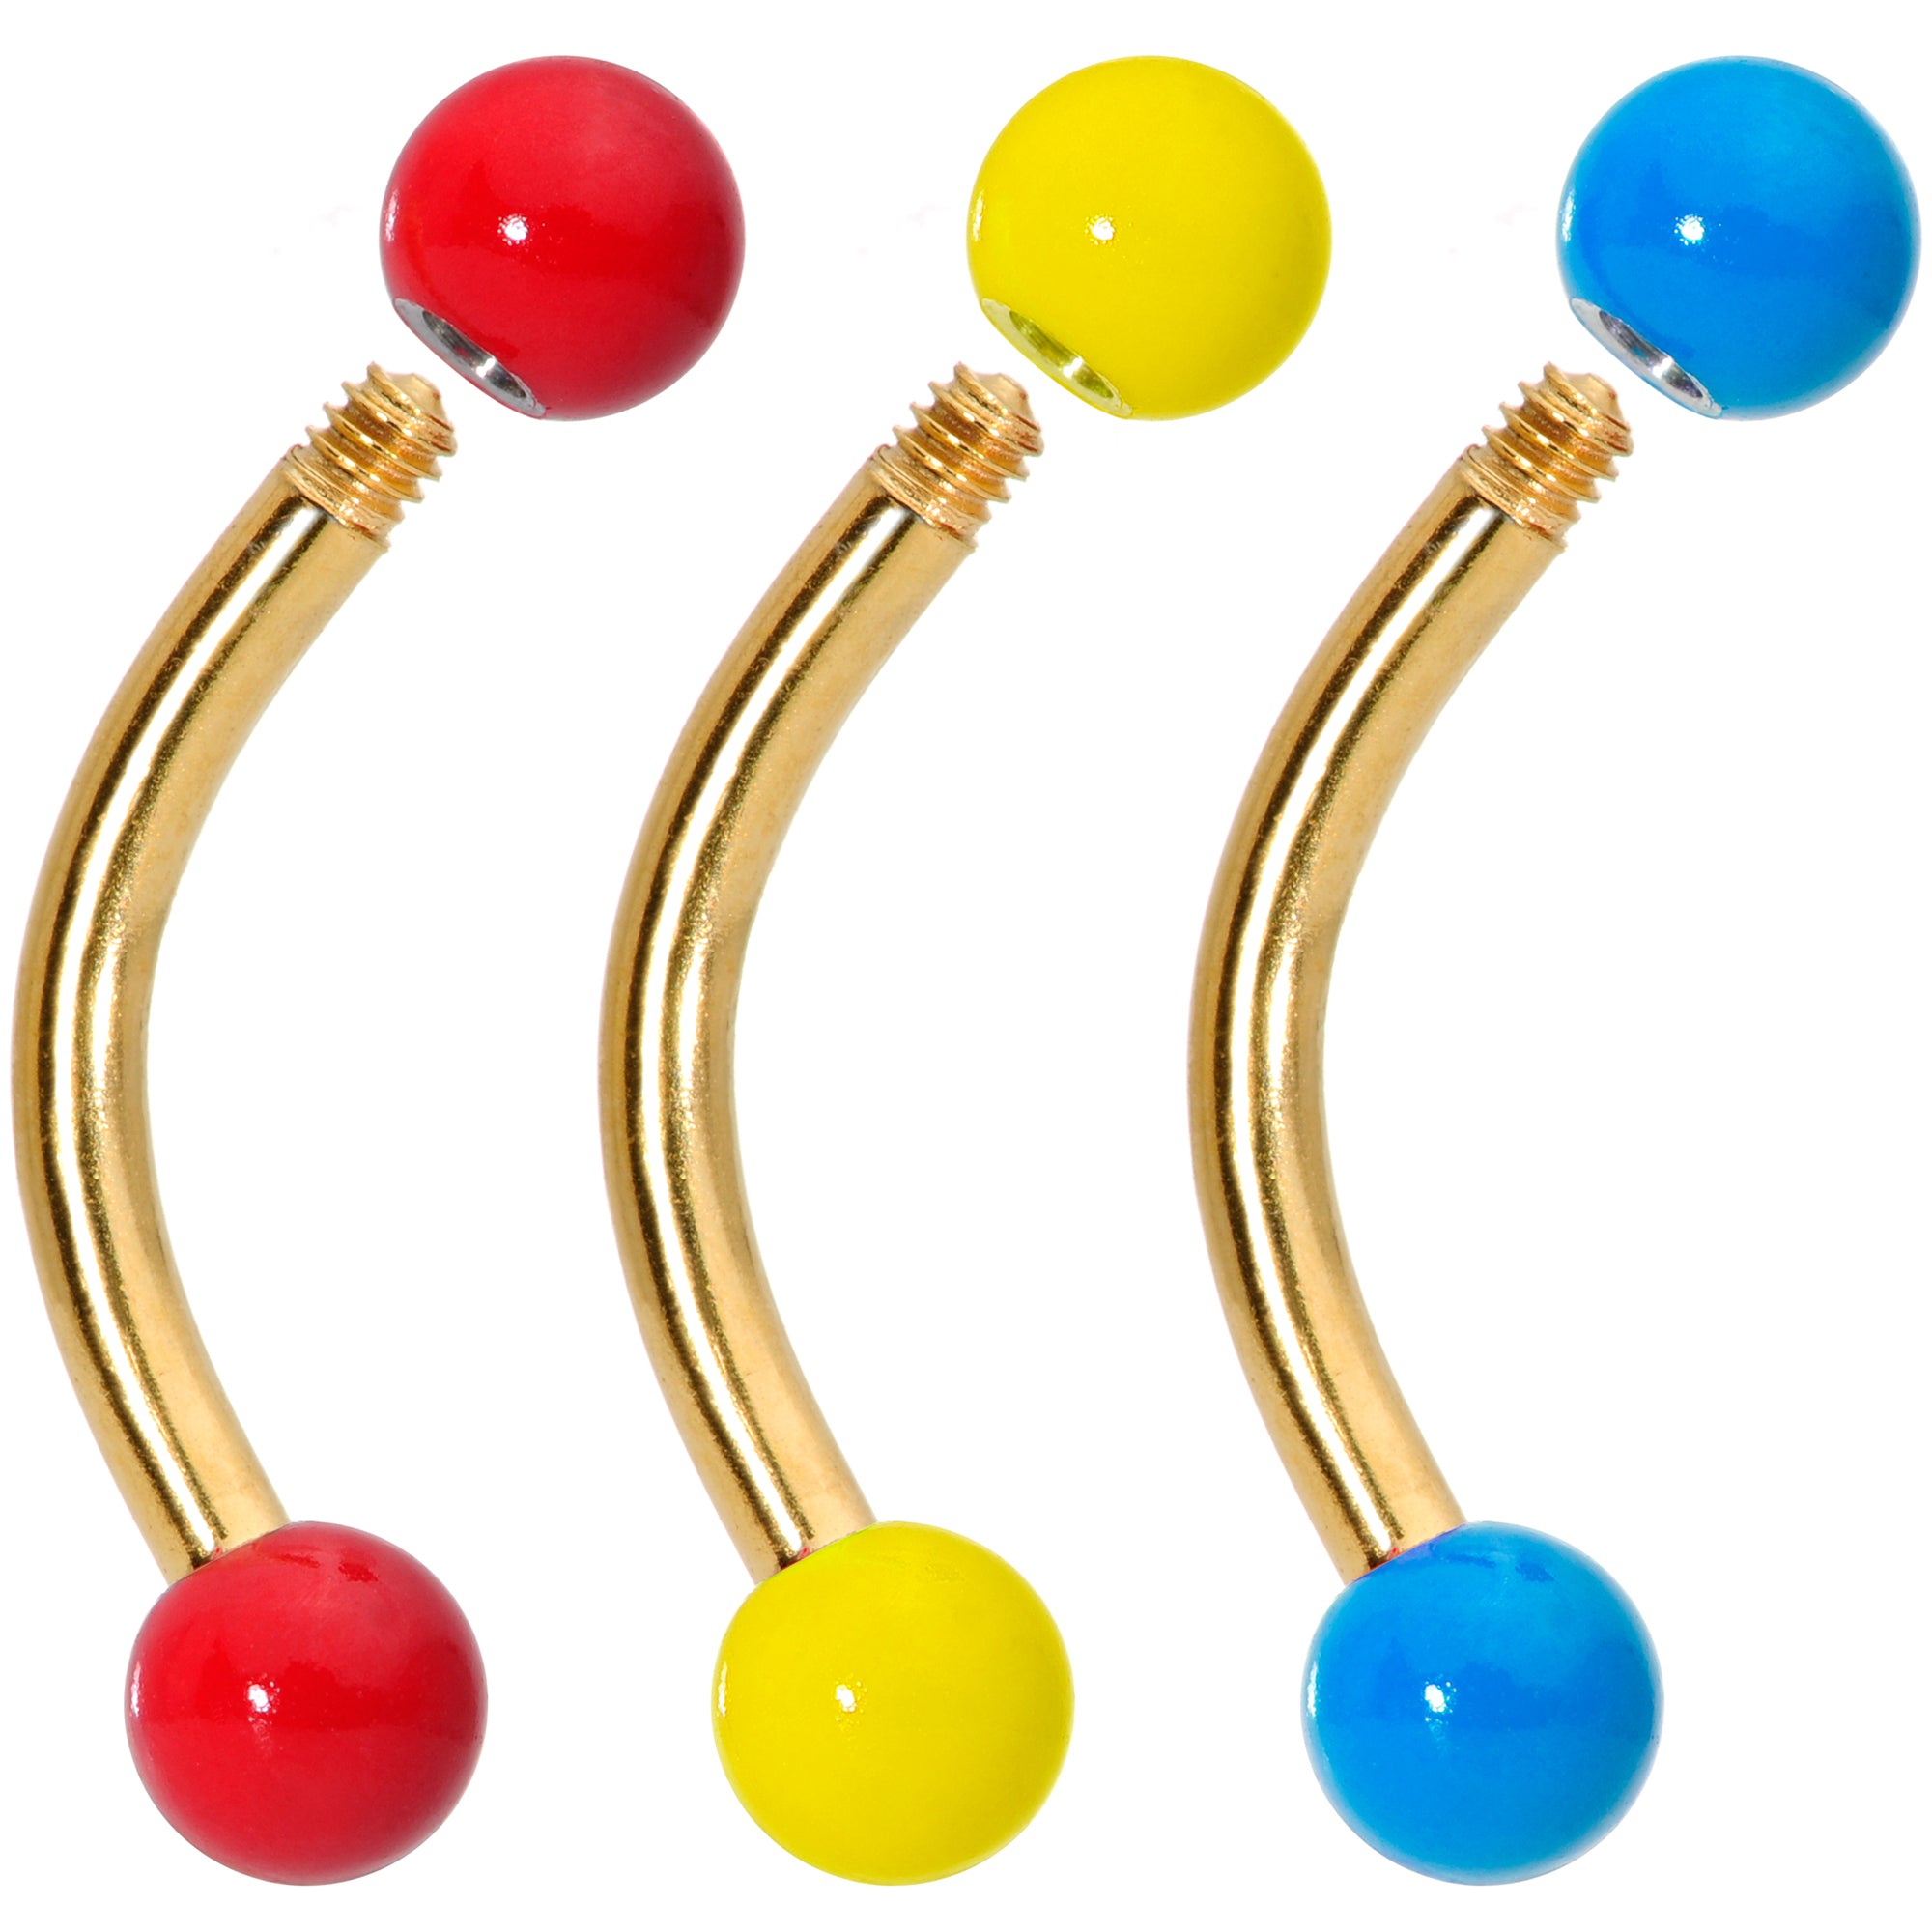 16 Gauge 5/16 Red Yellow Blue Glow Gold Tone Curved Barbell Set of 3